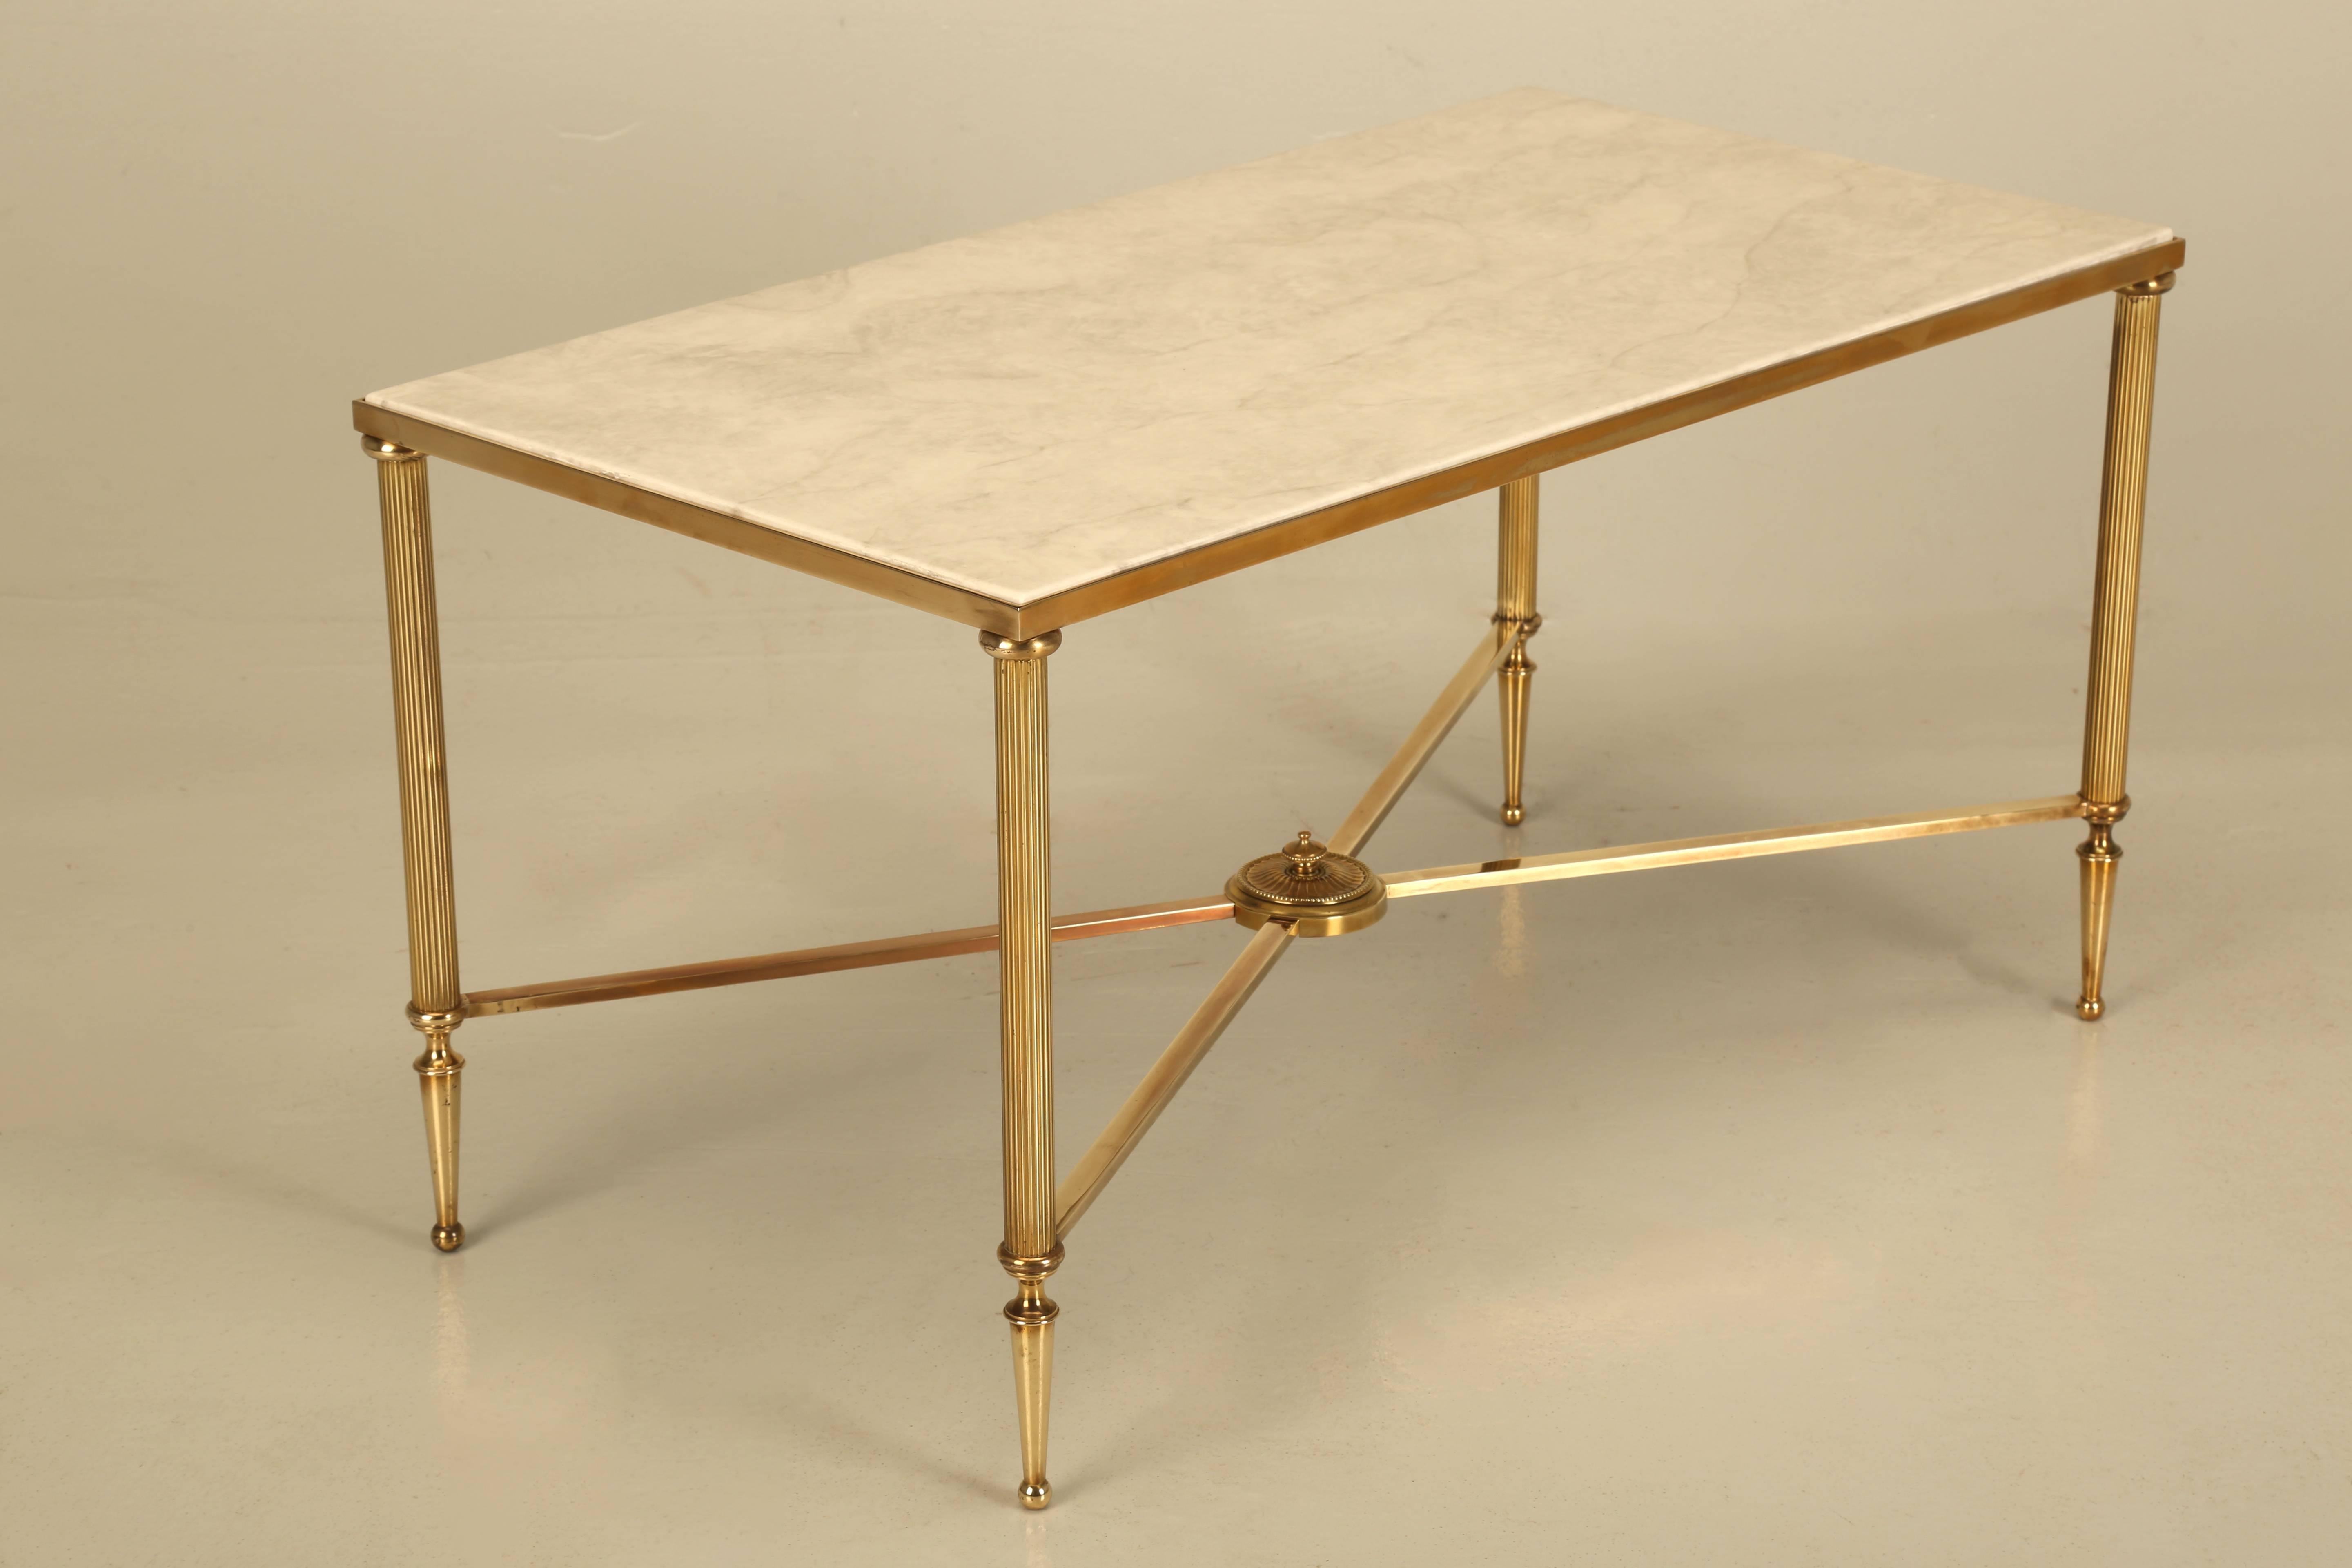 Vintage French, Mid-Century Modern coffee or cocktail table. Generally, there petite coffee tables have just a brass plated frame, but whomever made this one, built the Mid-Century Modern coffee table from polished solid brass and no, it is not